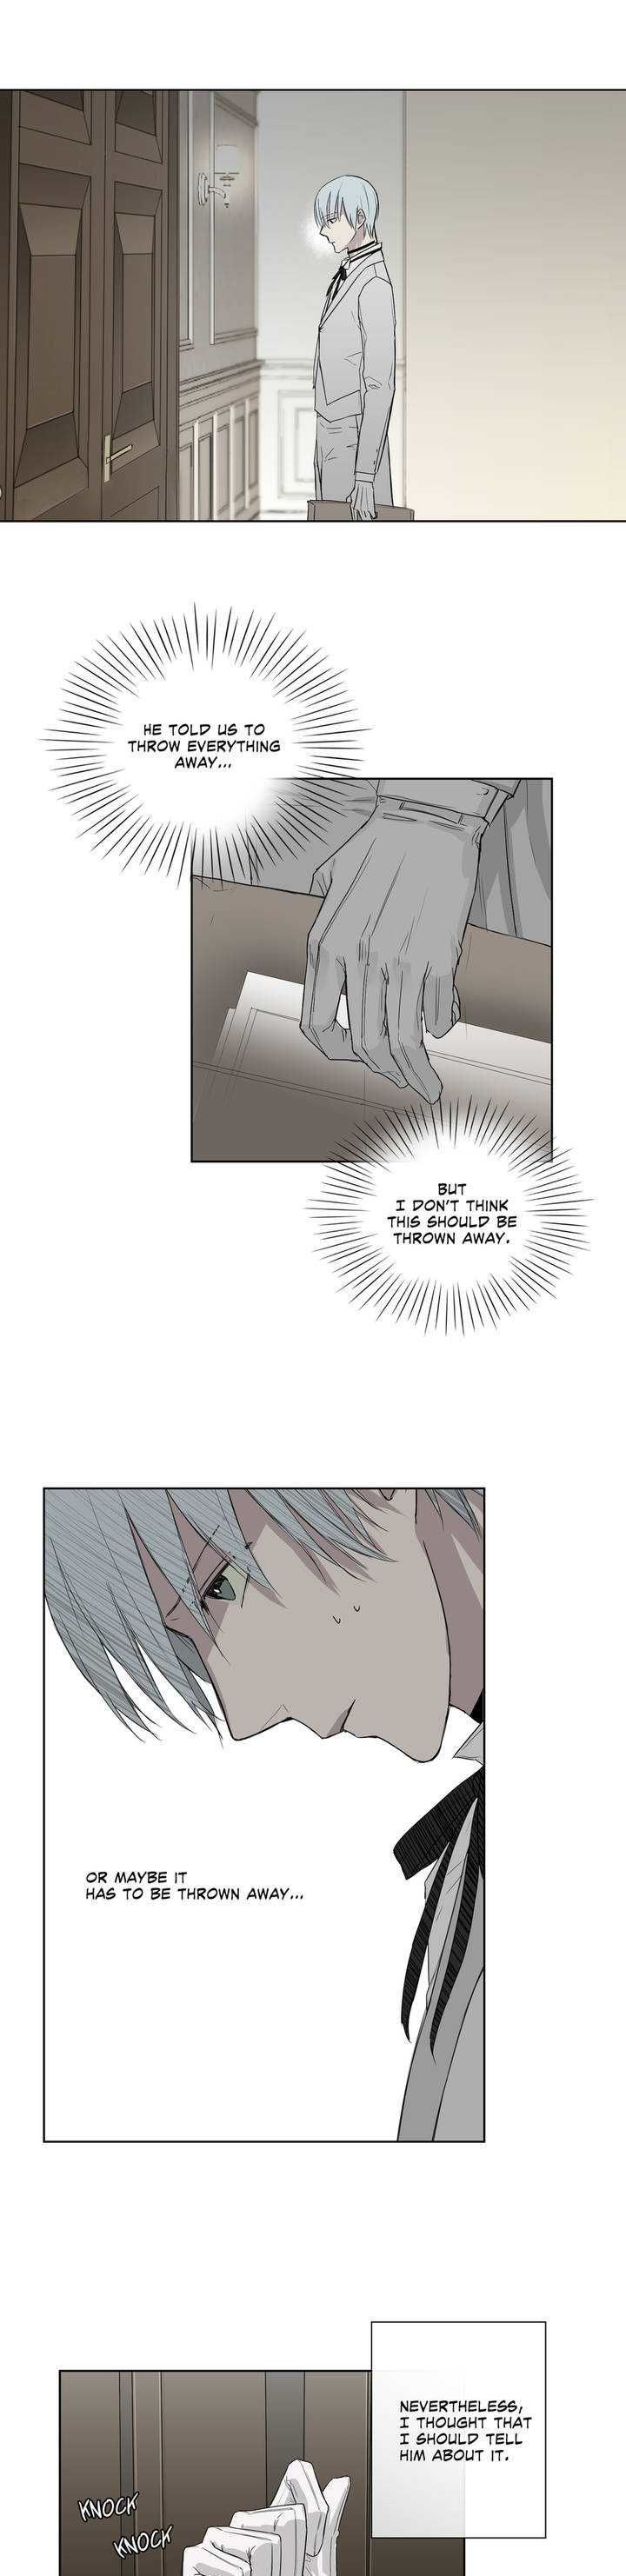 Royal Servant - Chapter 3 Page 16